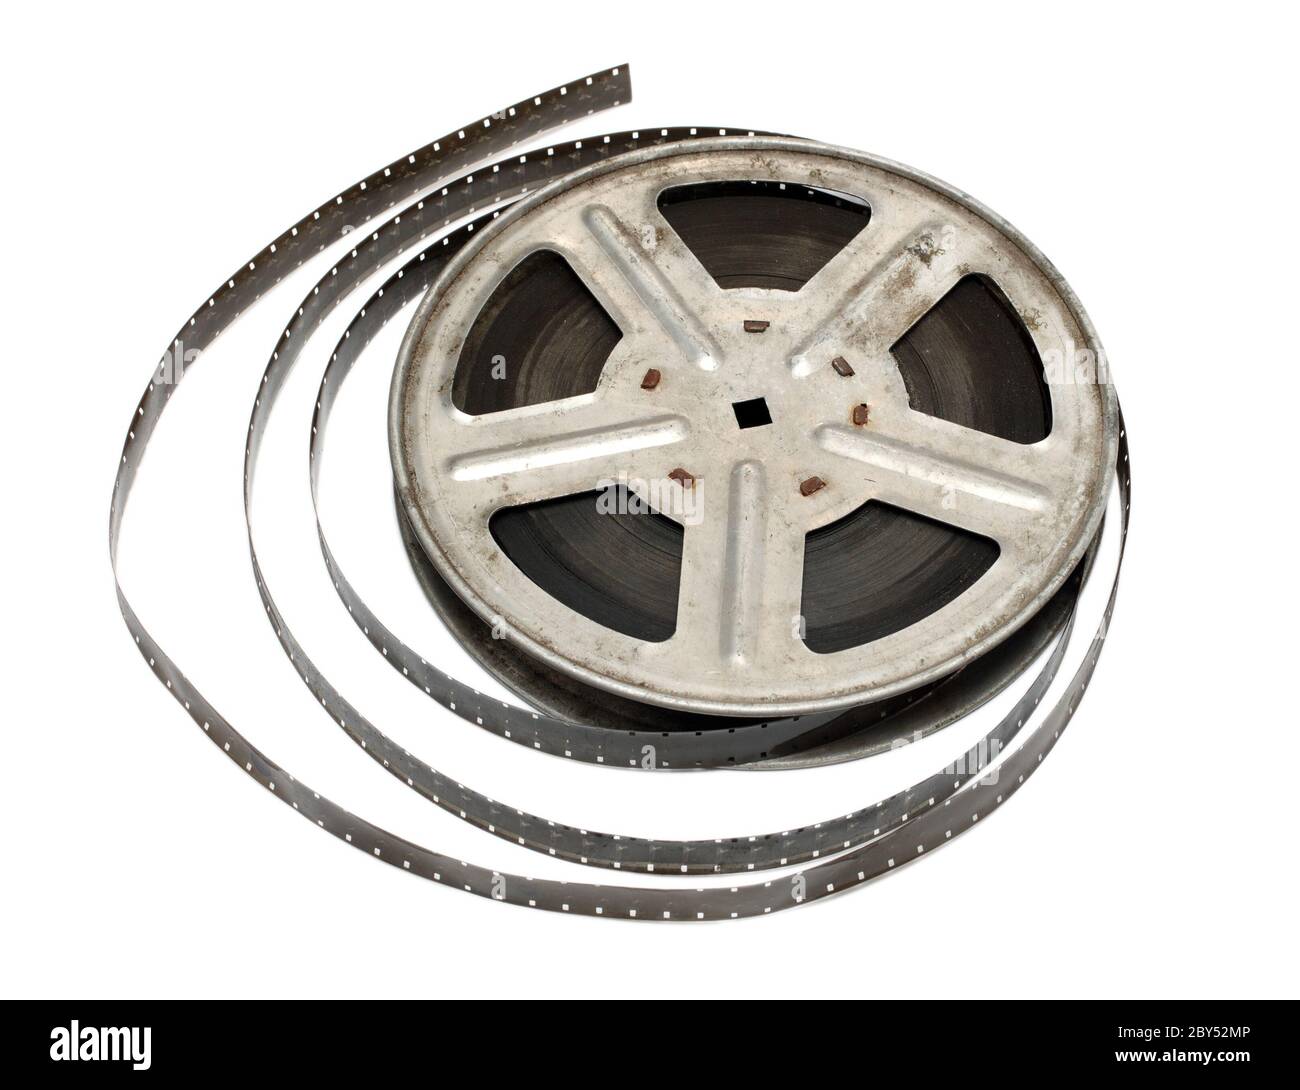 Old metal movie film reel Cut Out Stock Images & Pictures - Alamy